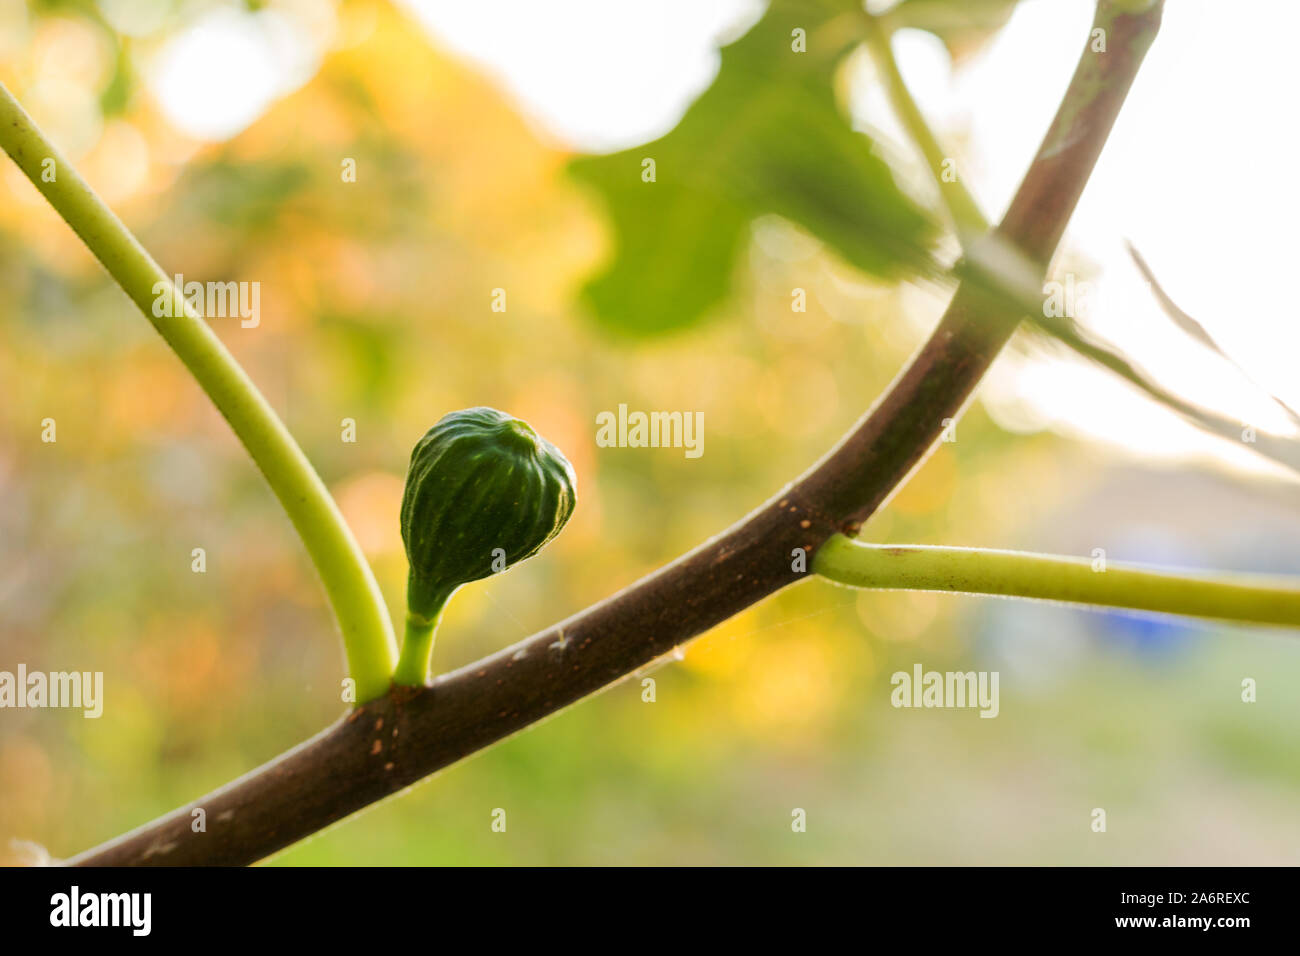 Unripe fresh green fig growing, ripening on a branch of a fig tree with green leaves. Farming, gardening, harvest concept. Stock Photo